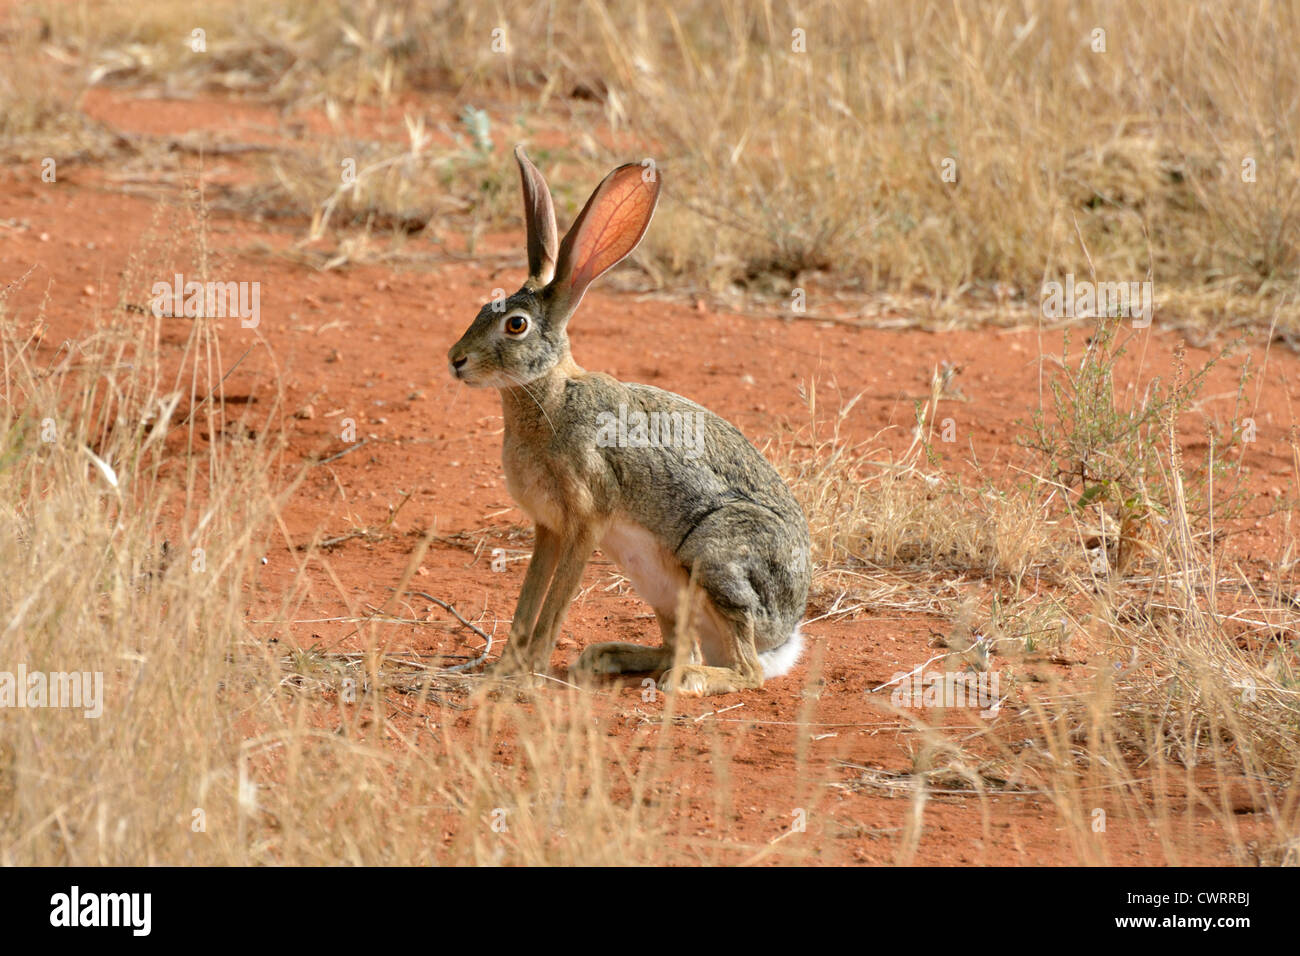 African Hare Stock Photo